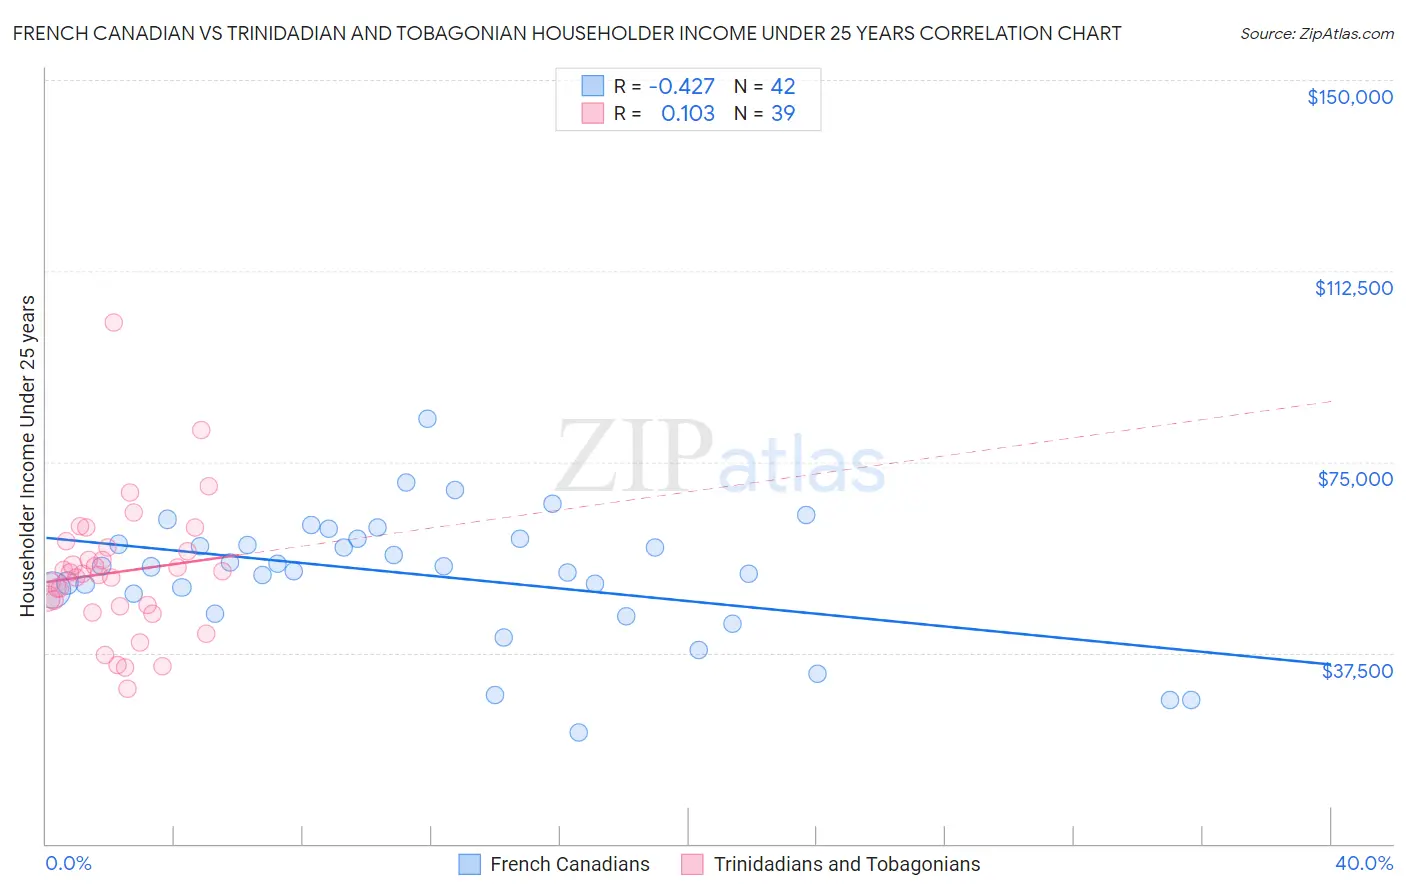 French Canadian vs Trinidadian and Tobagonian Householder Income Under 25 years